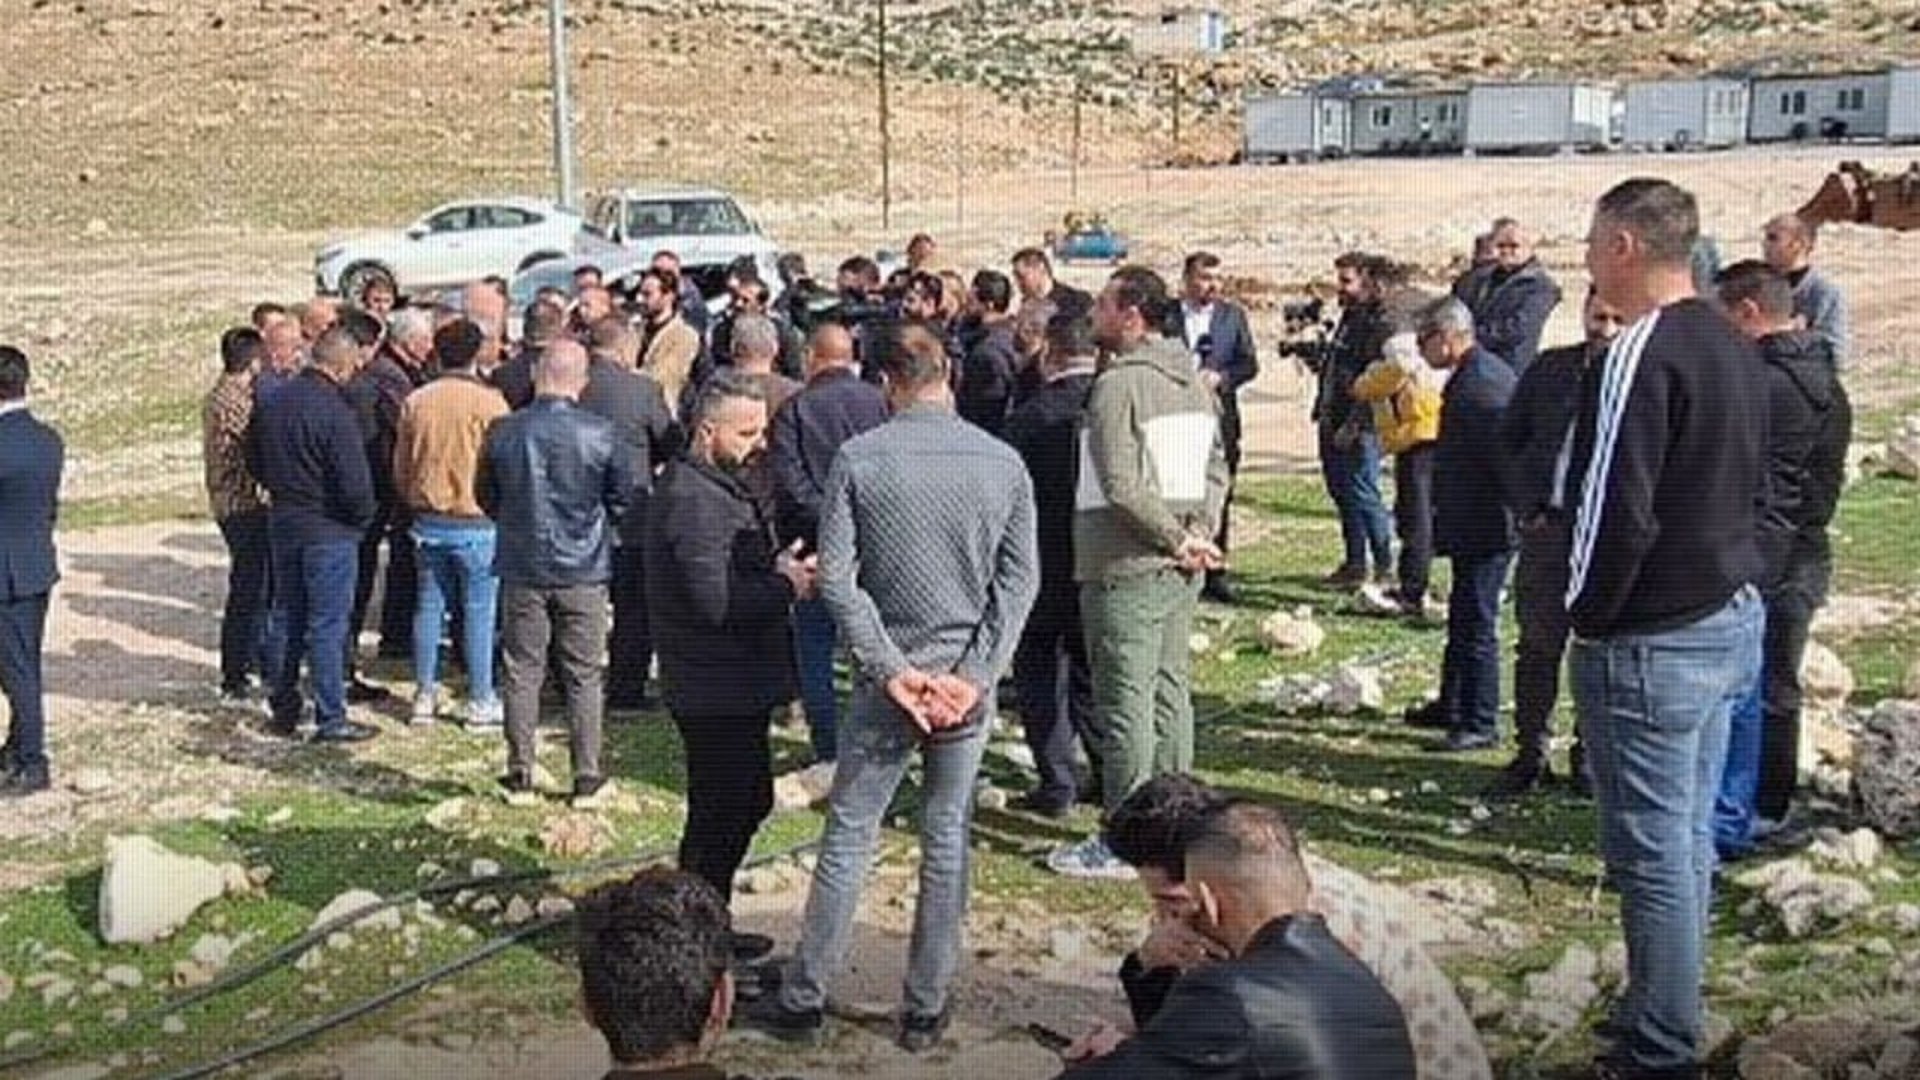 Local protest planned Zakho military academy training facility